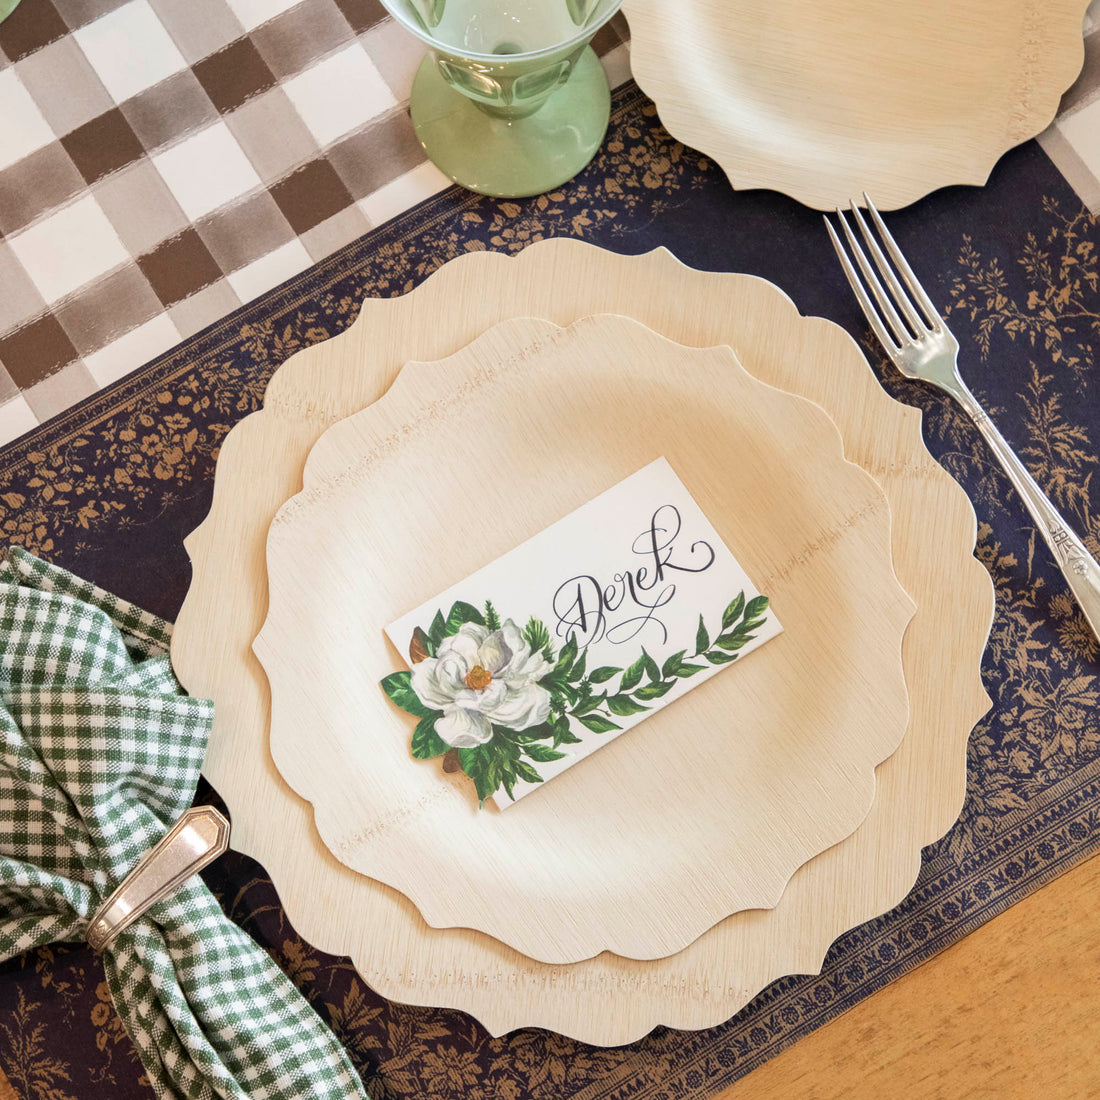 A compostable table setting with Veneerware Fancy Bamboo Plates certified by USDA organic, Bambu Wholesale napkins, and place cards.